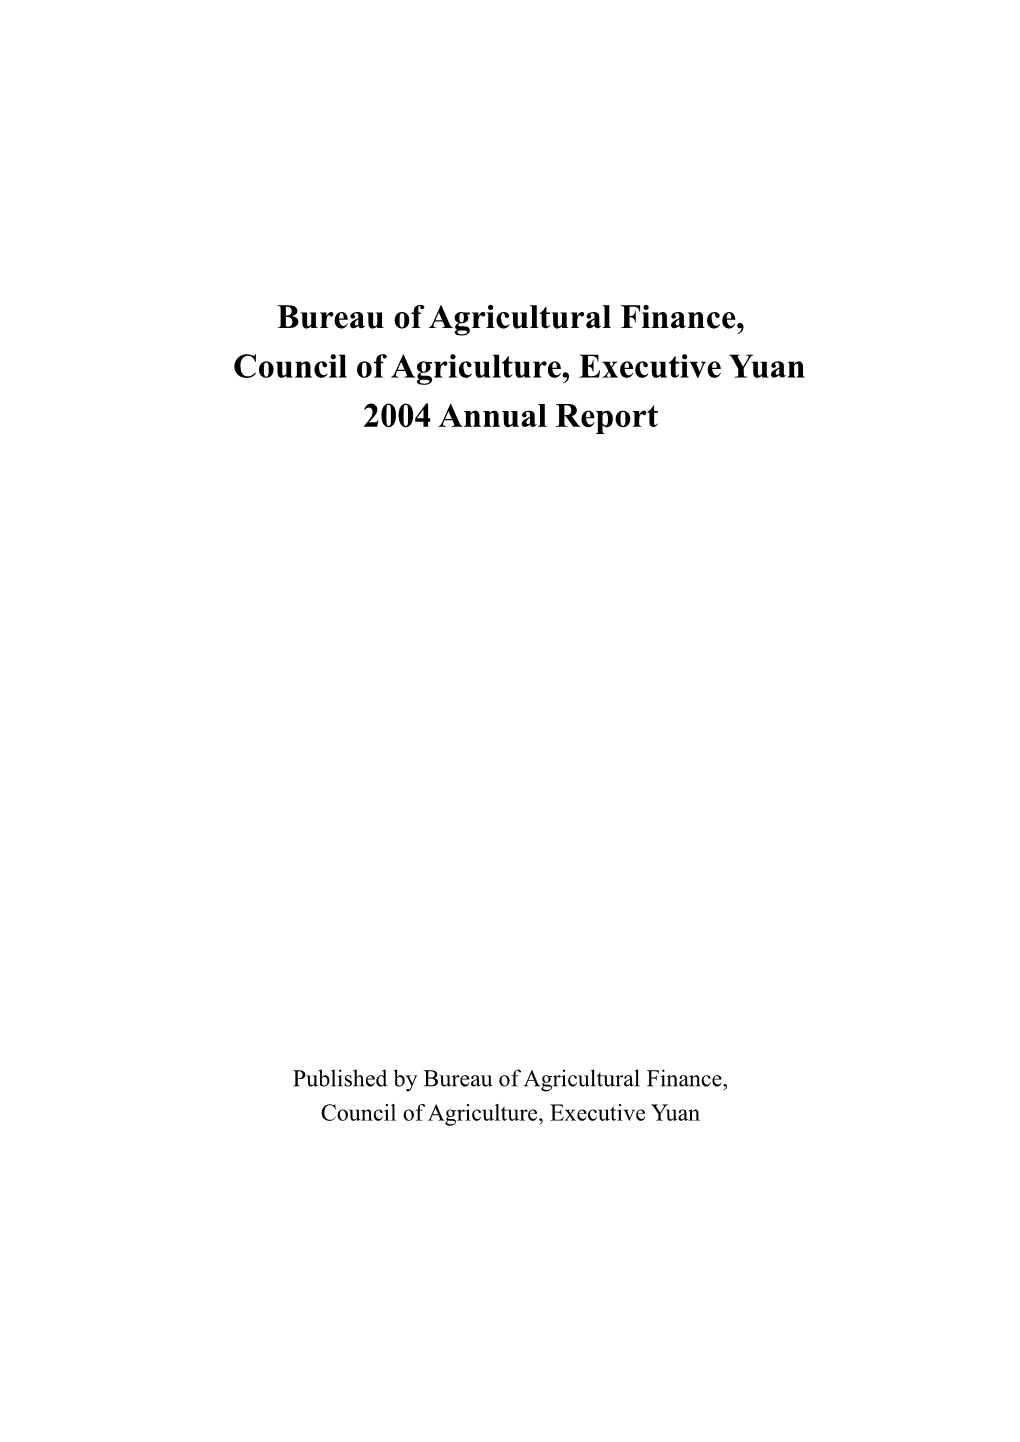 Bureau of Agricultural Finance, Council of Agriculture, Executive Yuan 2004 Annual Report